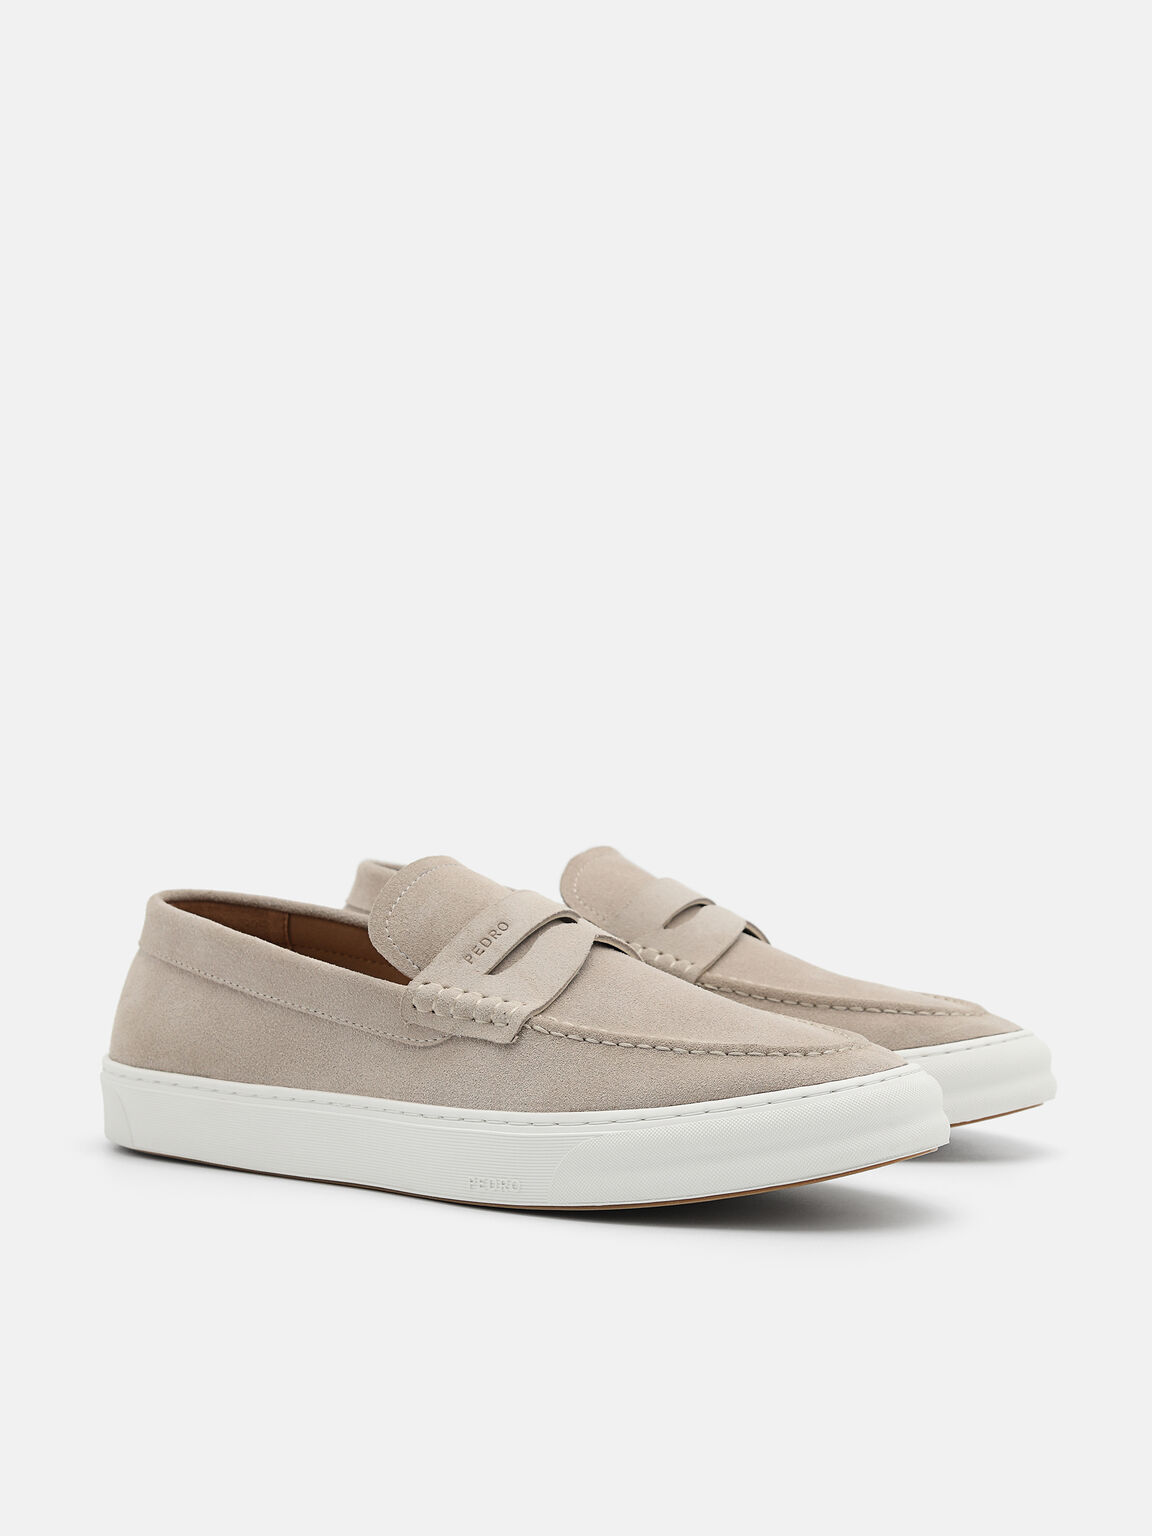 Ridge Suede Slip-On Sneakers, Taupe